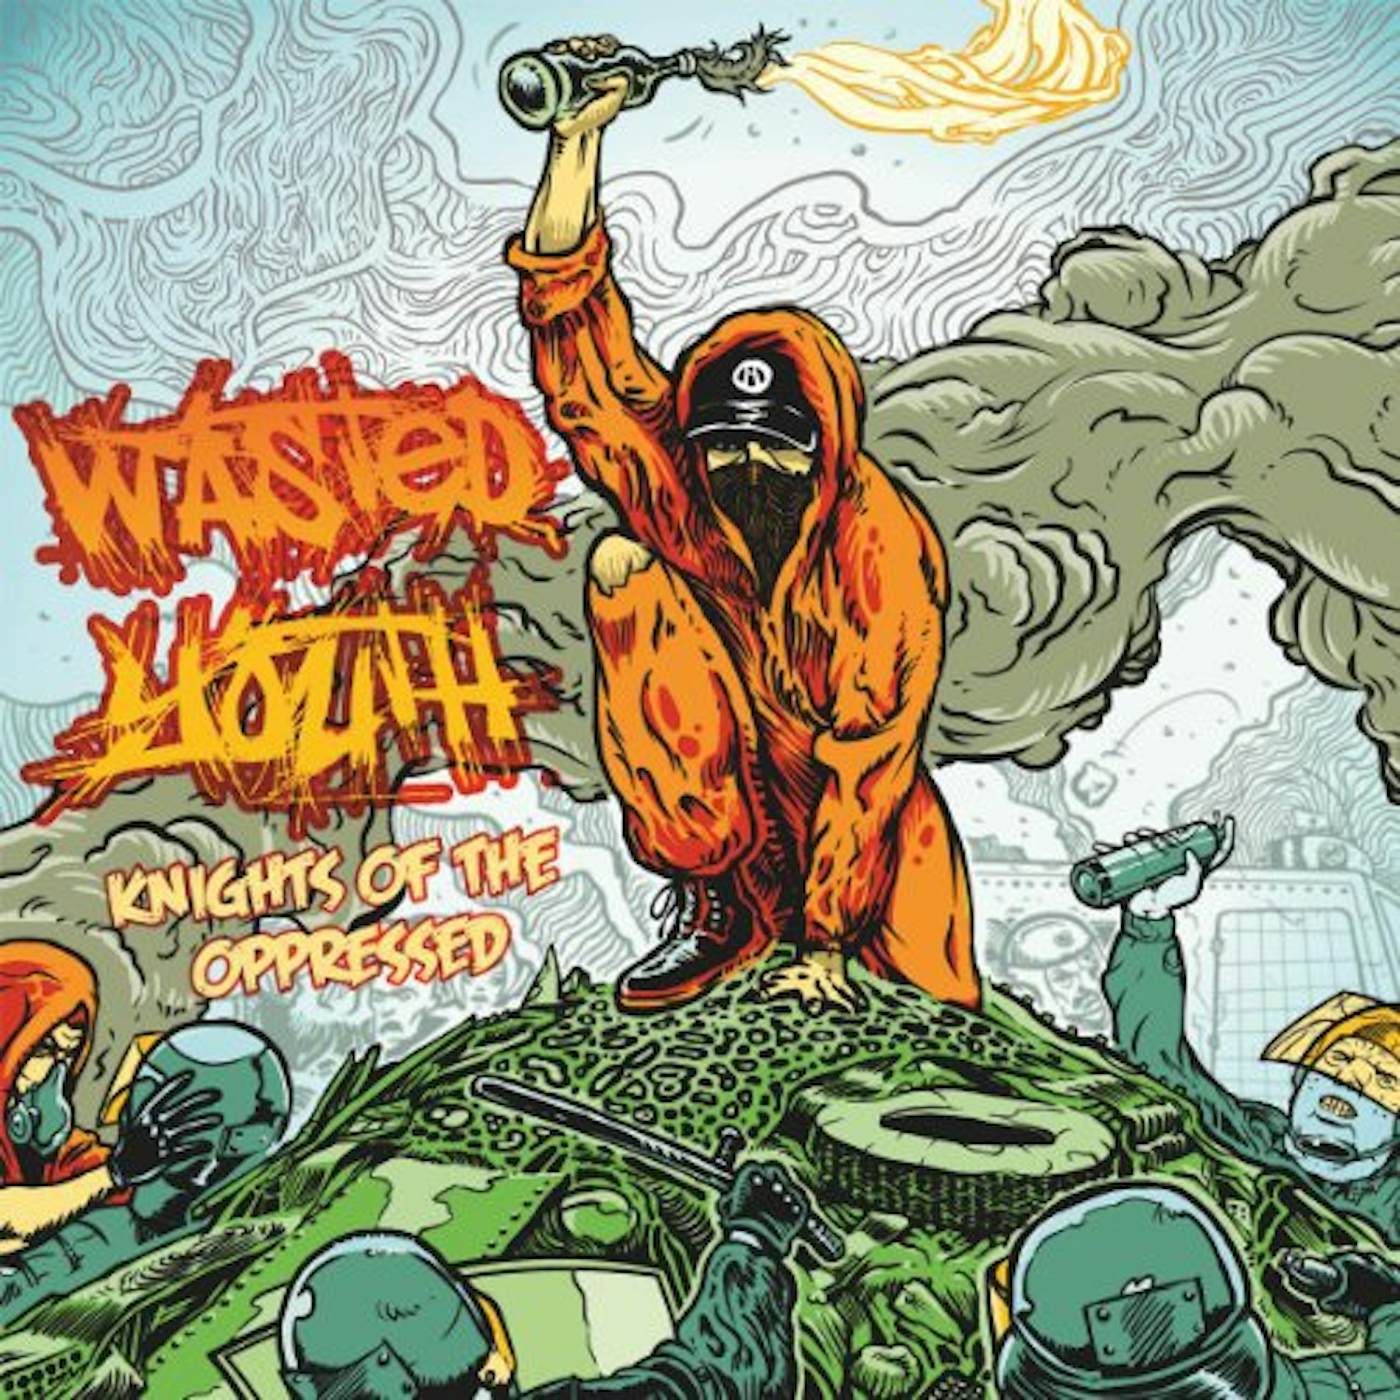 Wasted Youth Knights Of The Oppressed Vinyl Record